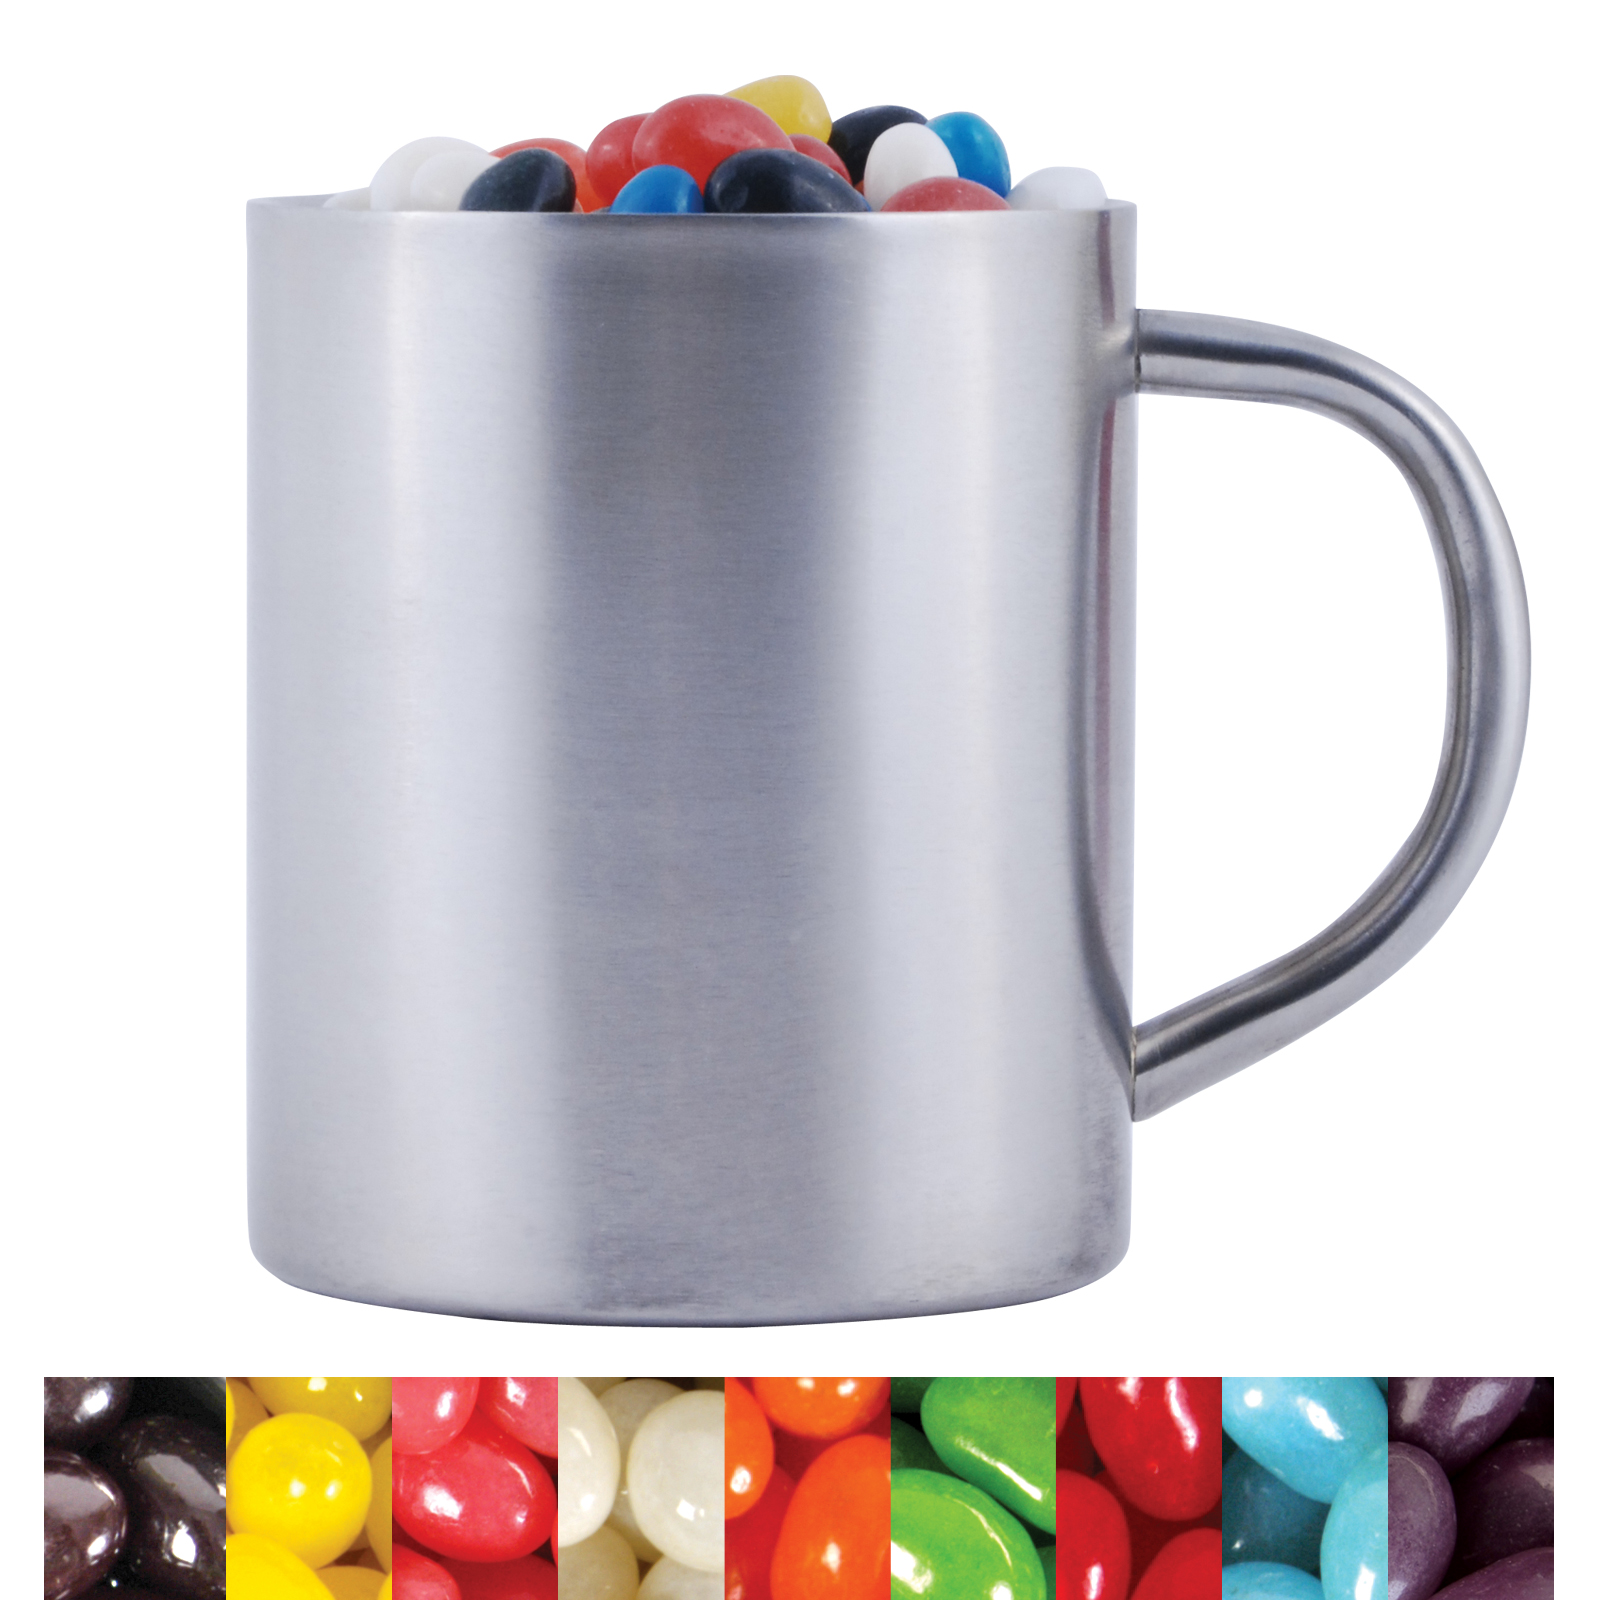 Jelly Beans Assorted Colour Mini Jelly Beans in Java Mug assorted